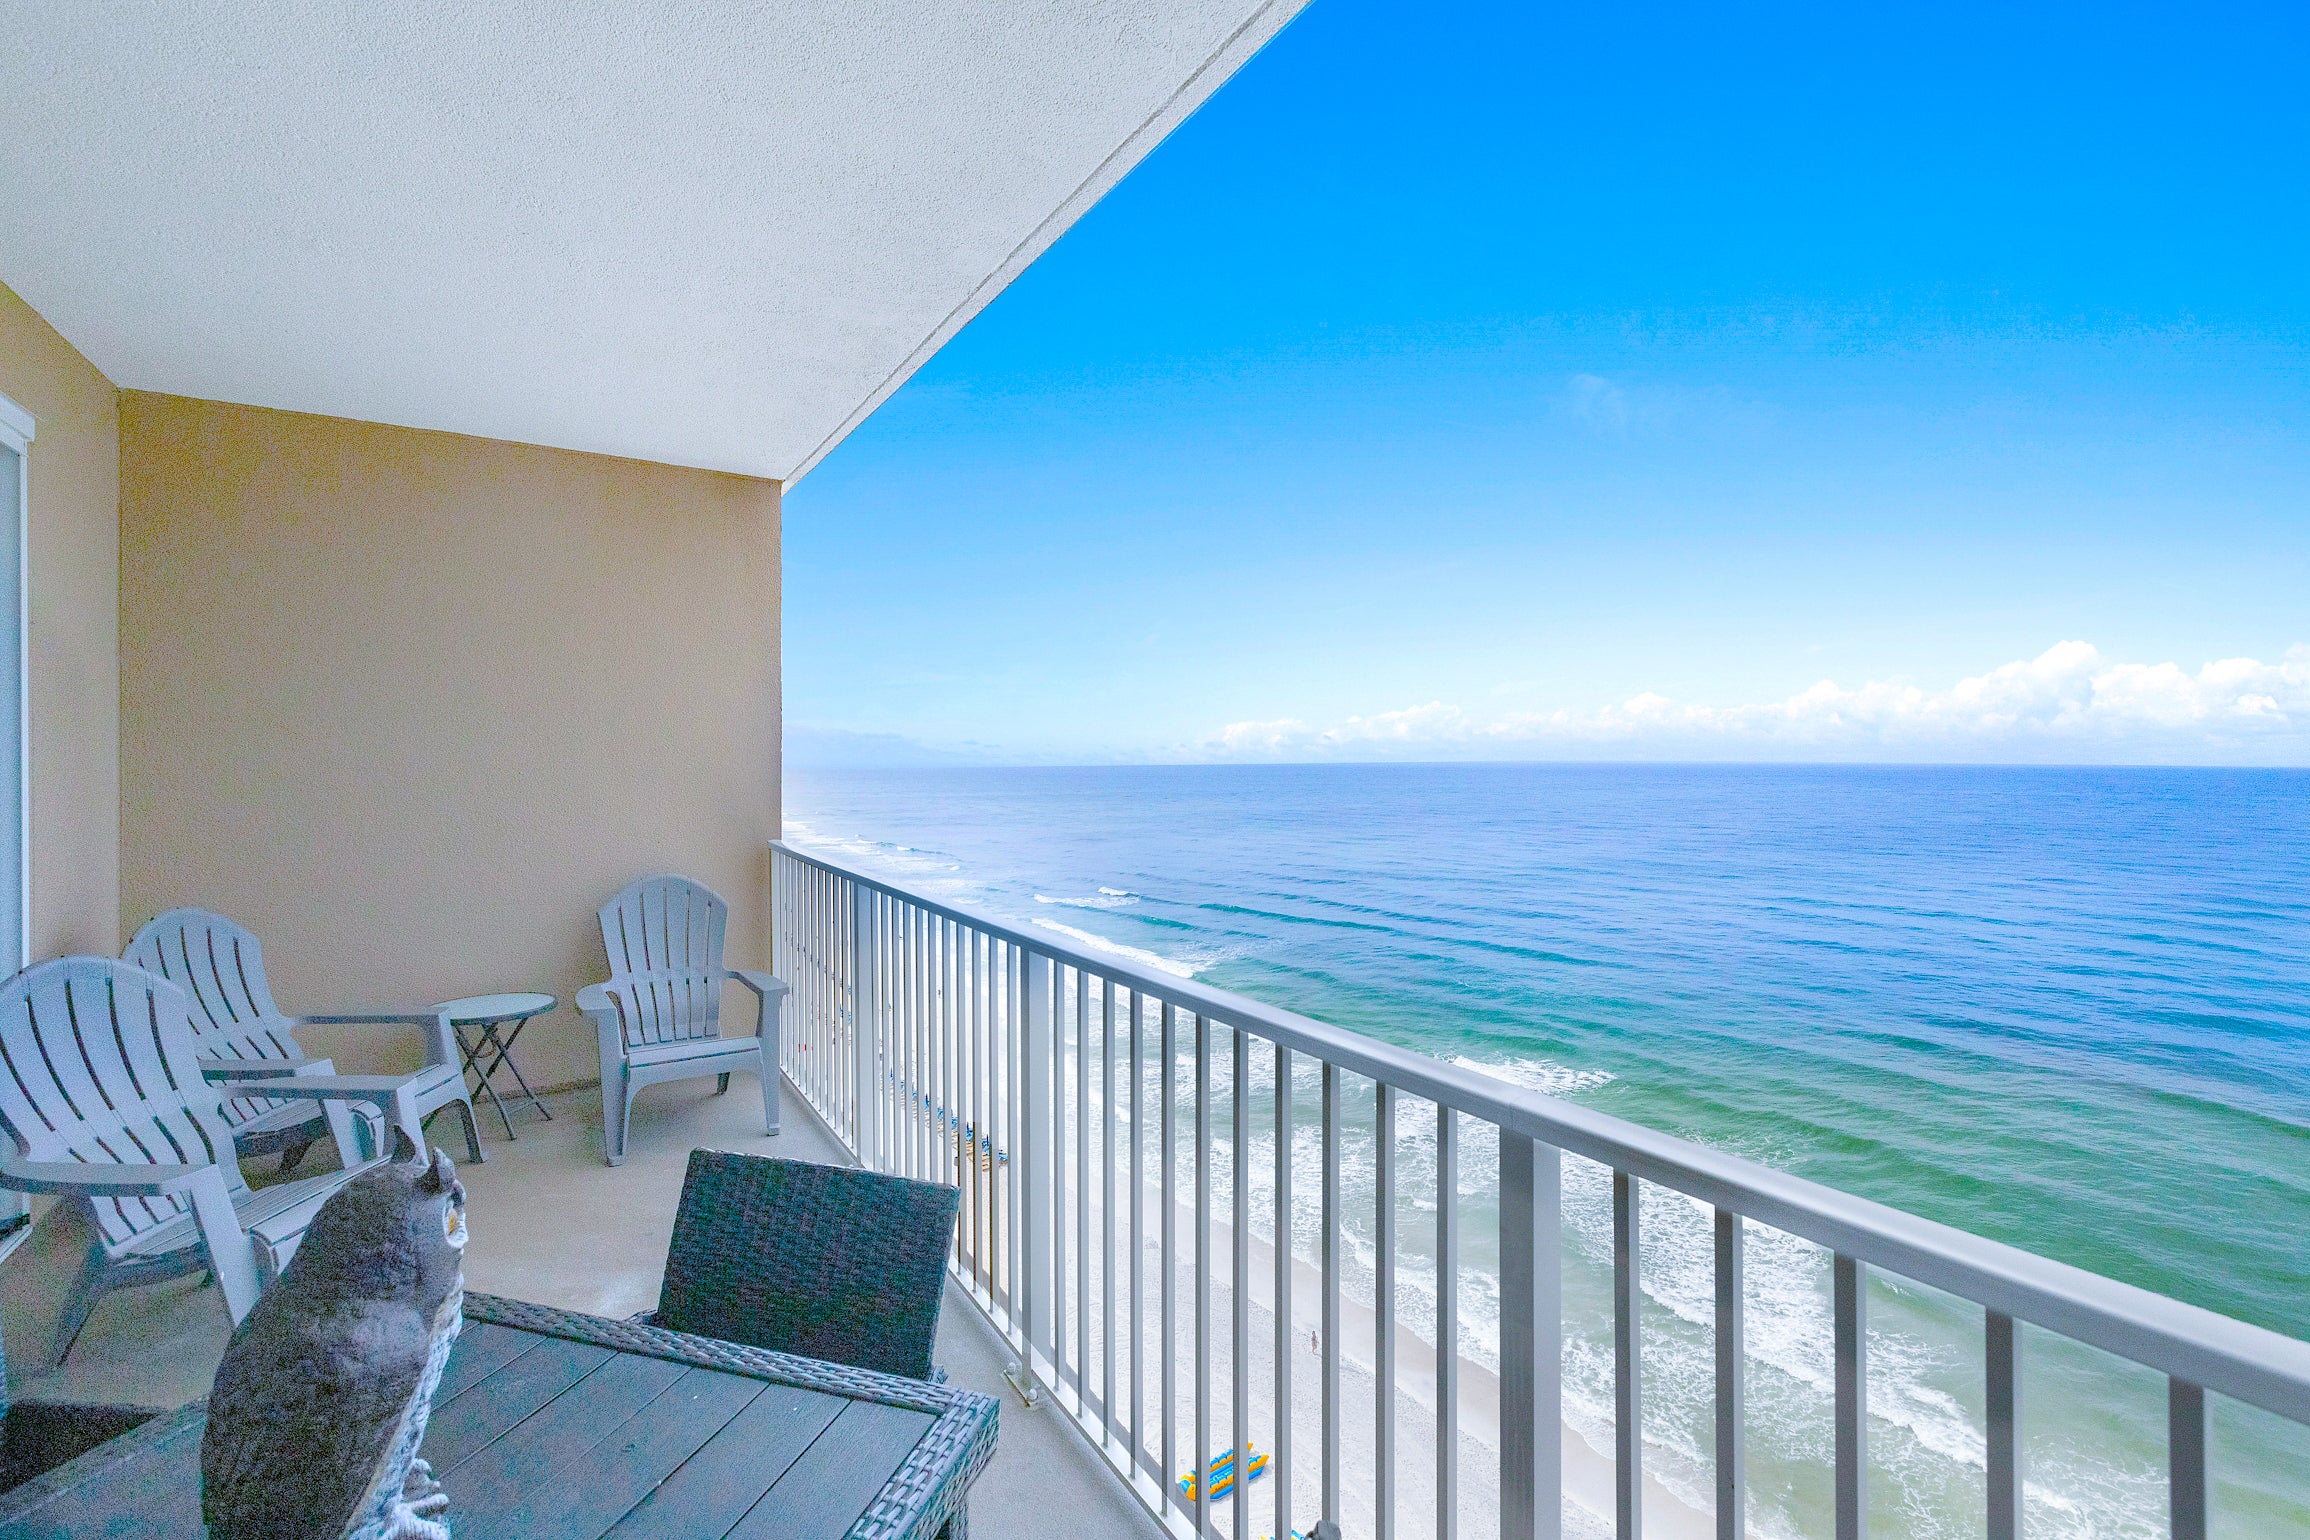 Relax, dine or entertain on the spacious balcony